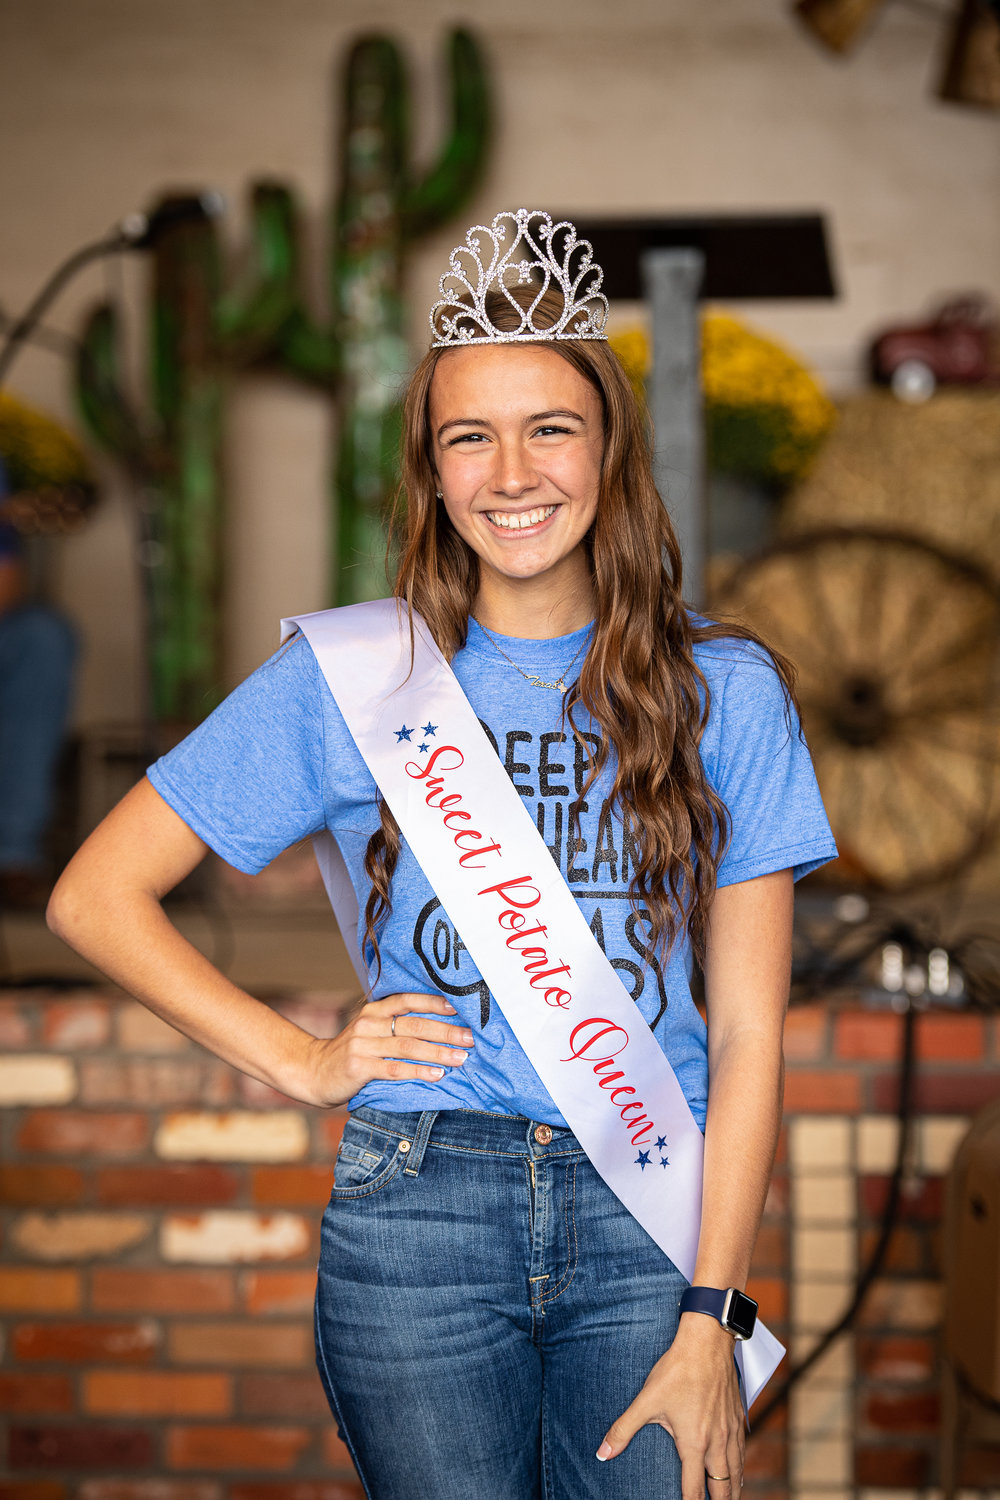 Justina Peterson, senior at Alba-Golden, was named the Sweet Potato Queen Saturday at the annual festival in Golden.